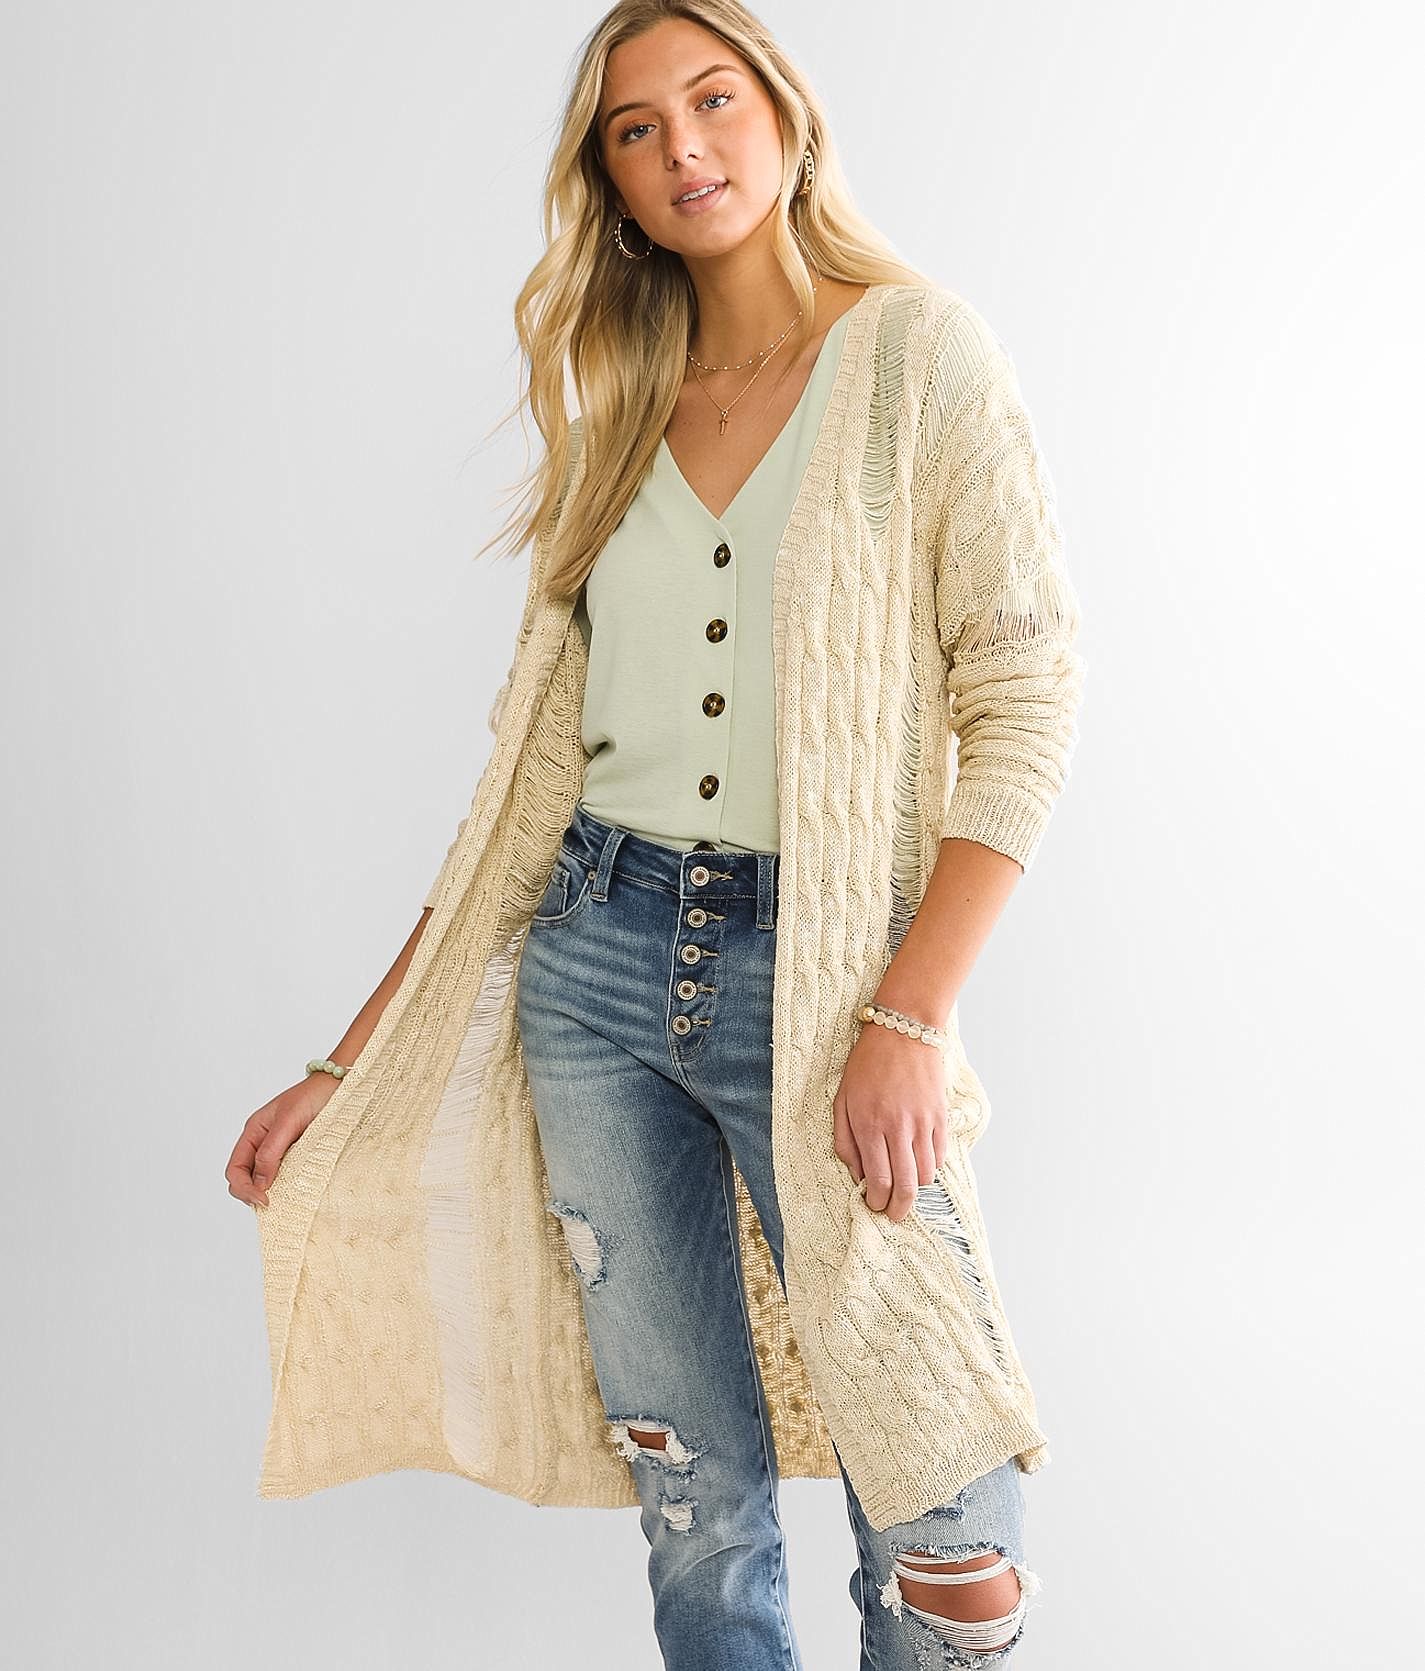 Willow & Root Feather Trim Cardigan Sweater - Black Small, Women's